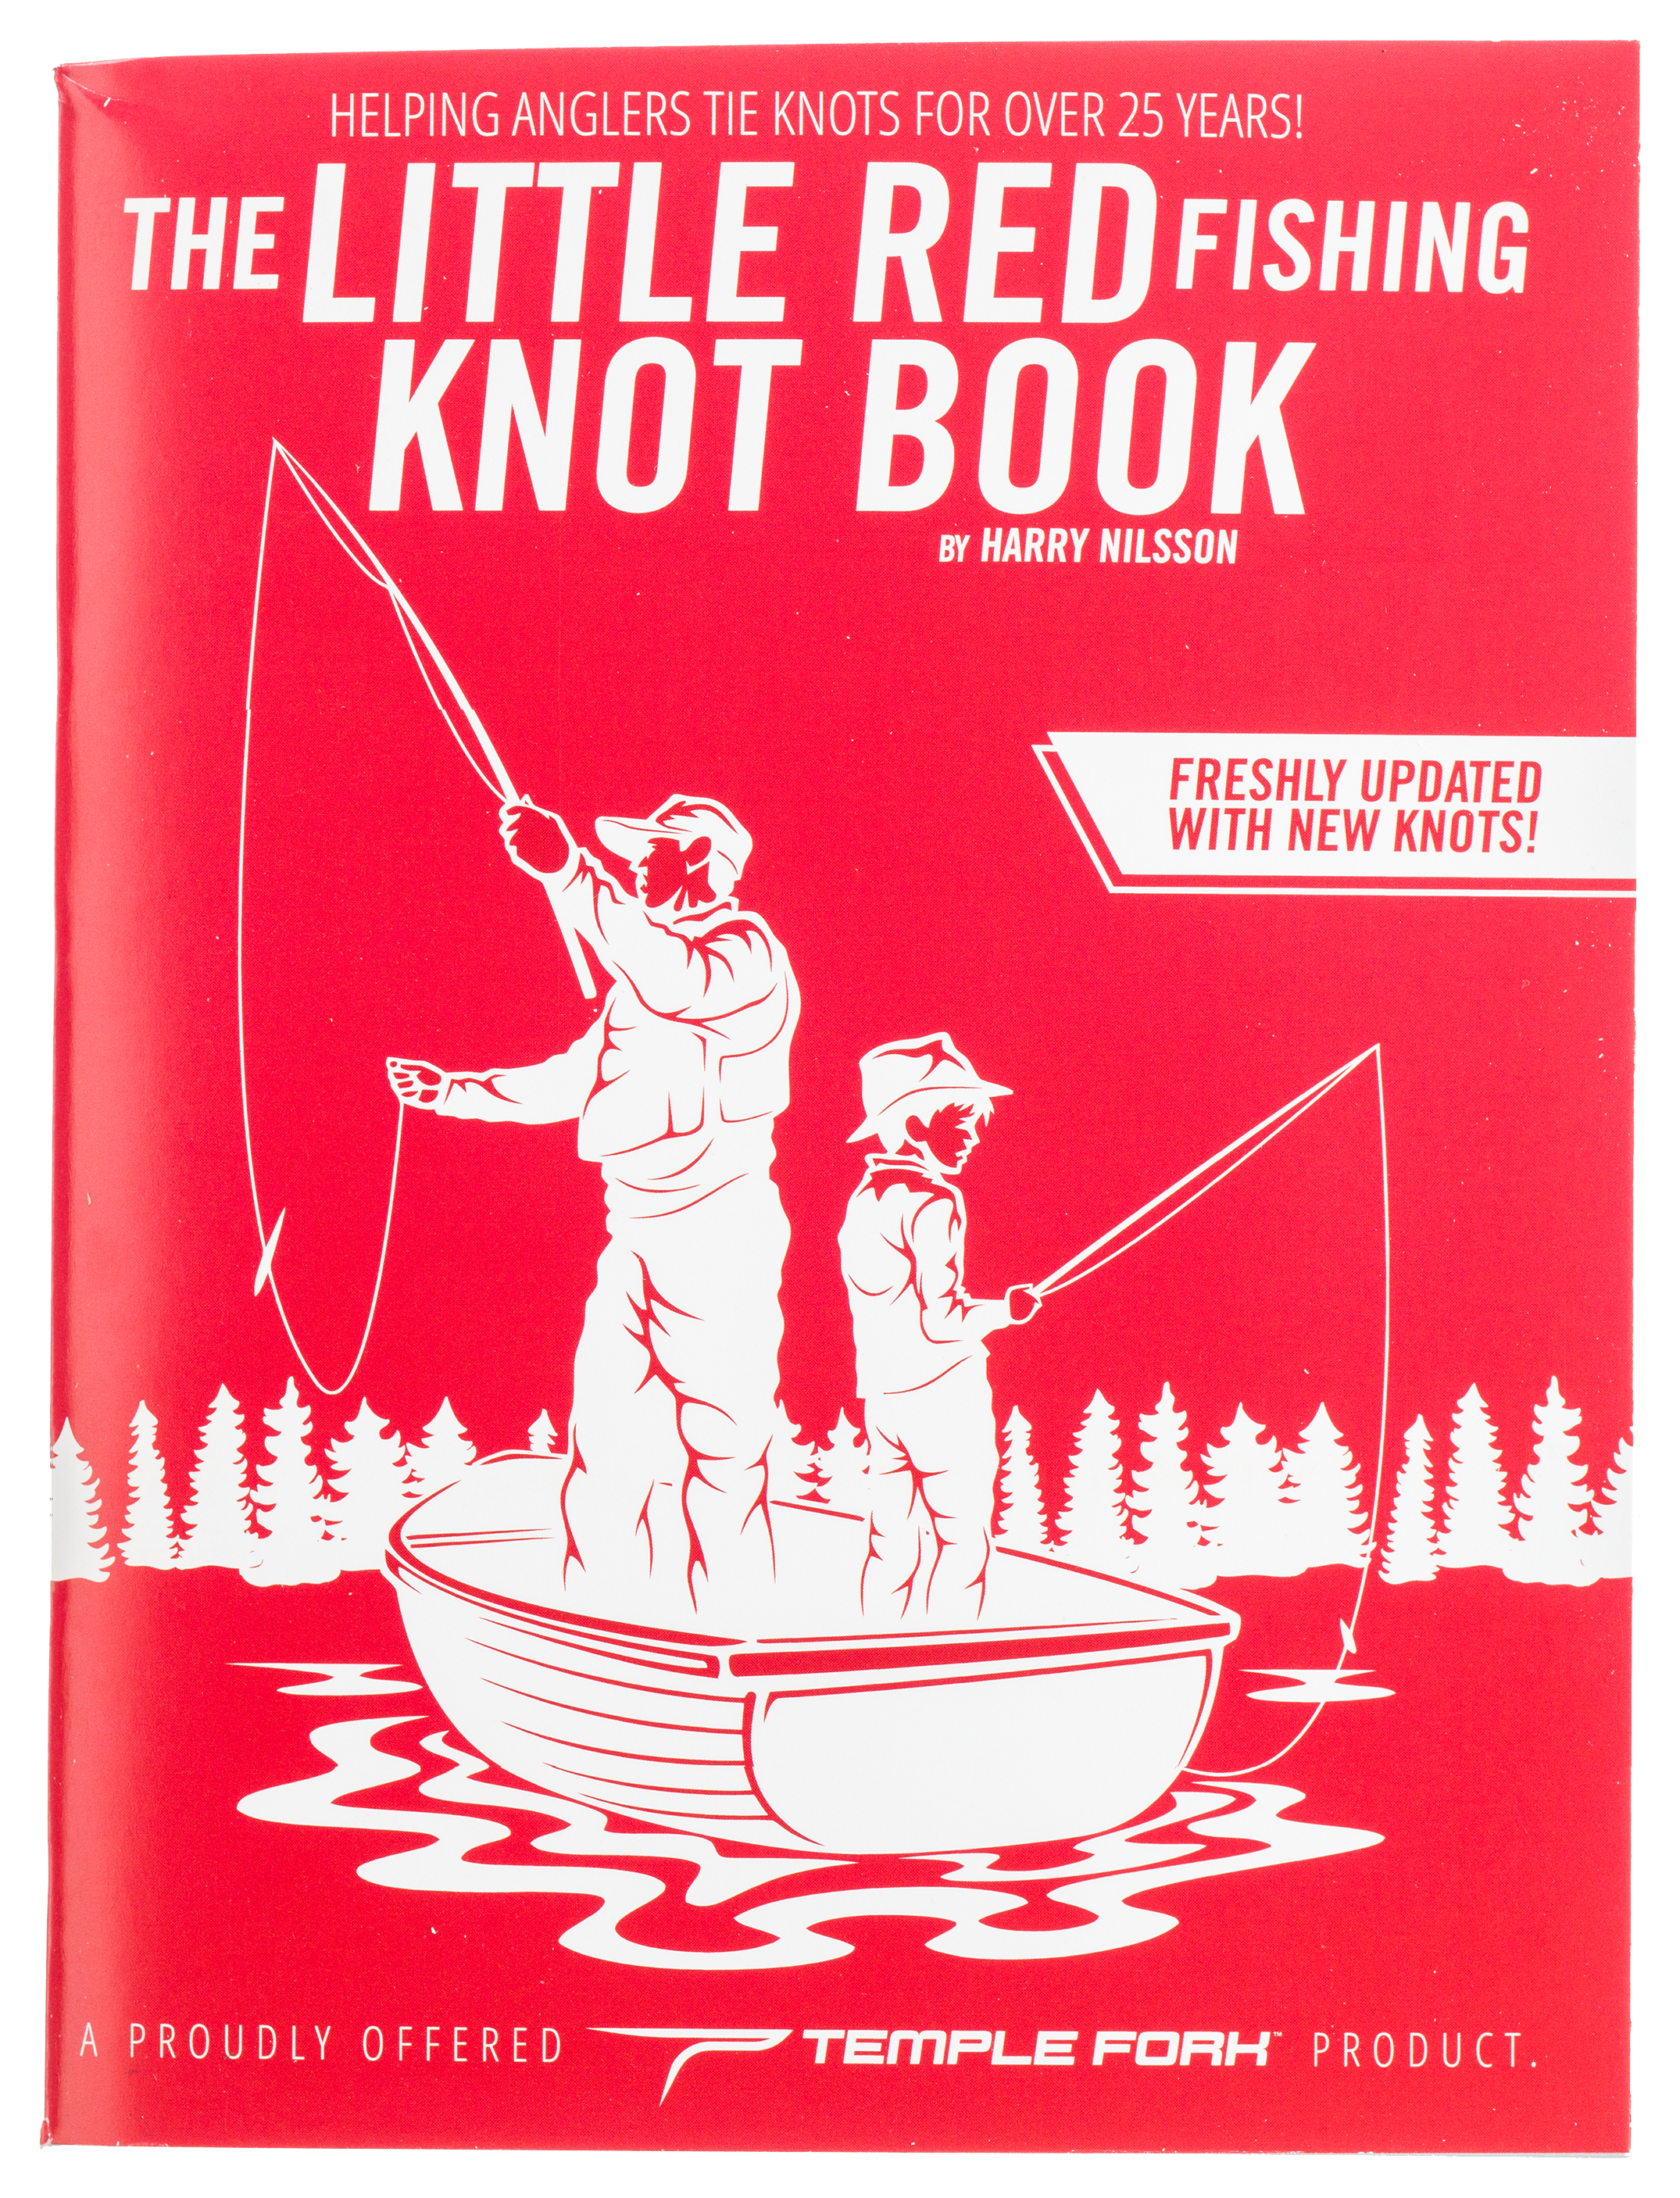 The Little Red Fishing Knot Book by Harry Nilsson Updated Edition